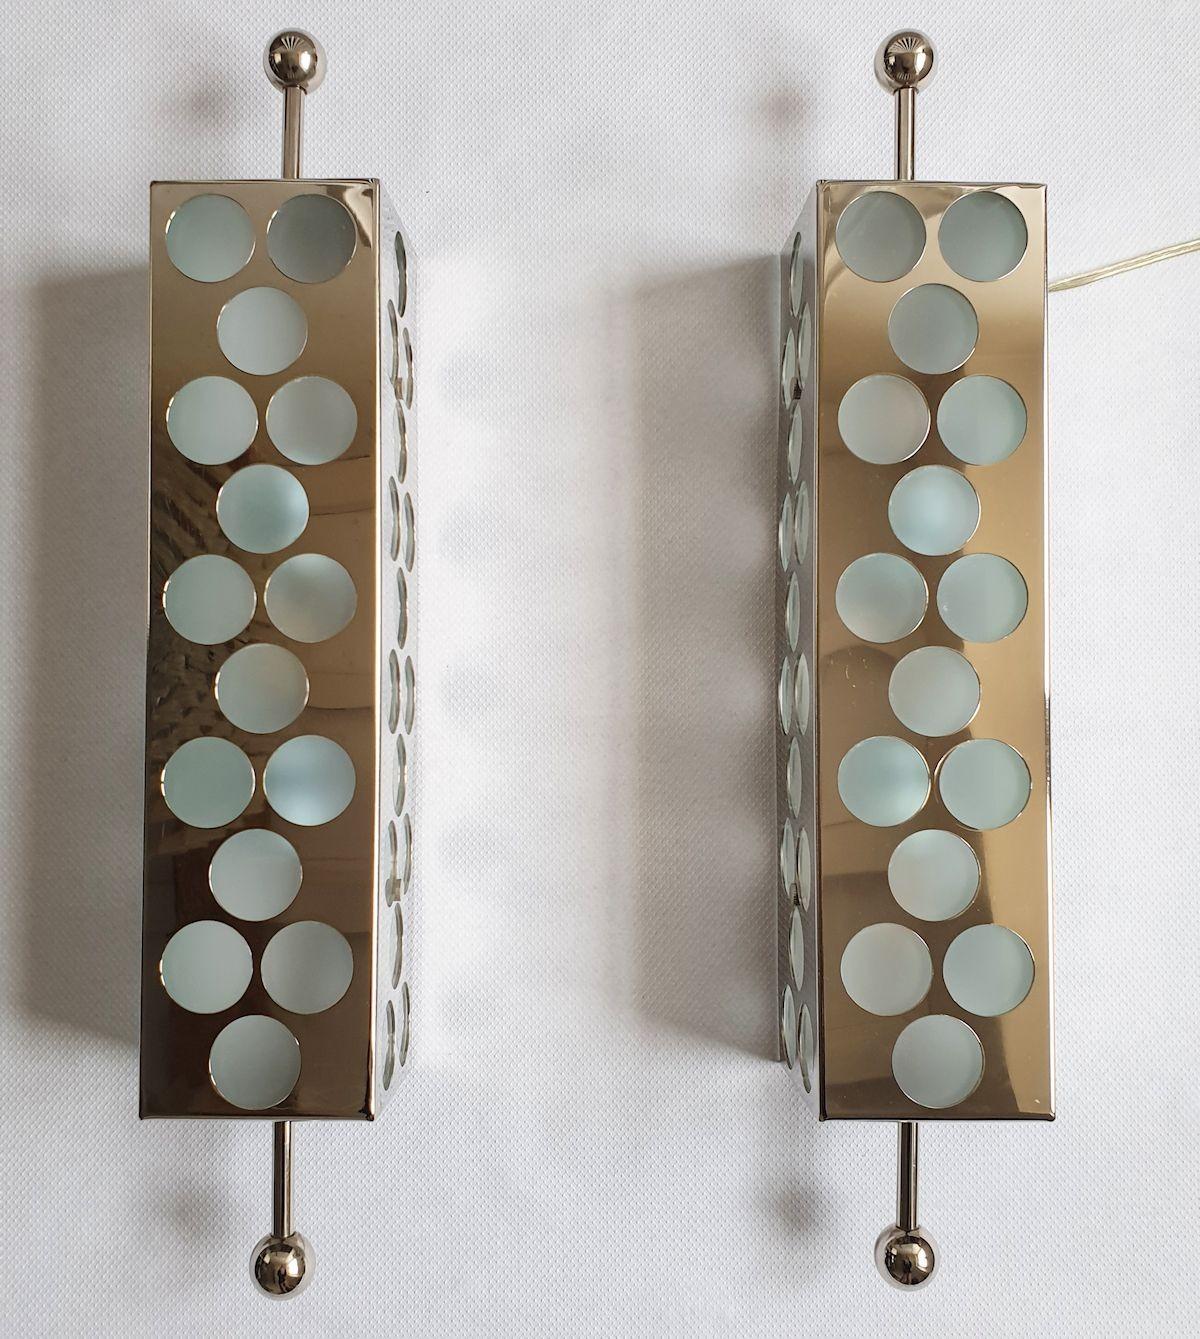 Pair of modern geometric vintage wall sconces, in the style of Sciolari, Italy 1980s.
The Mid-Century Modern sconces are made of nickel and frosted glass.
They have a Mid-Mod trendy design.
The sconces have 2 lights each and are rewired for the